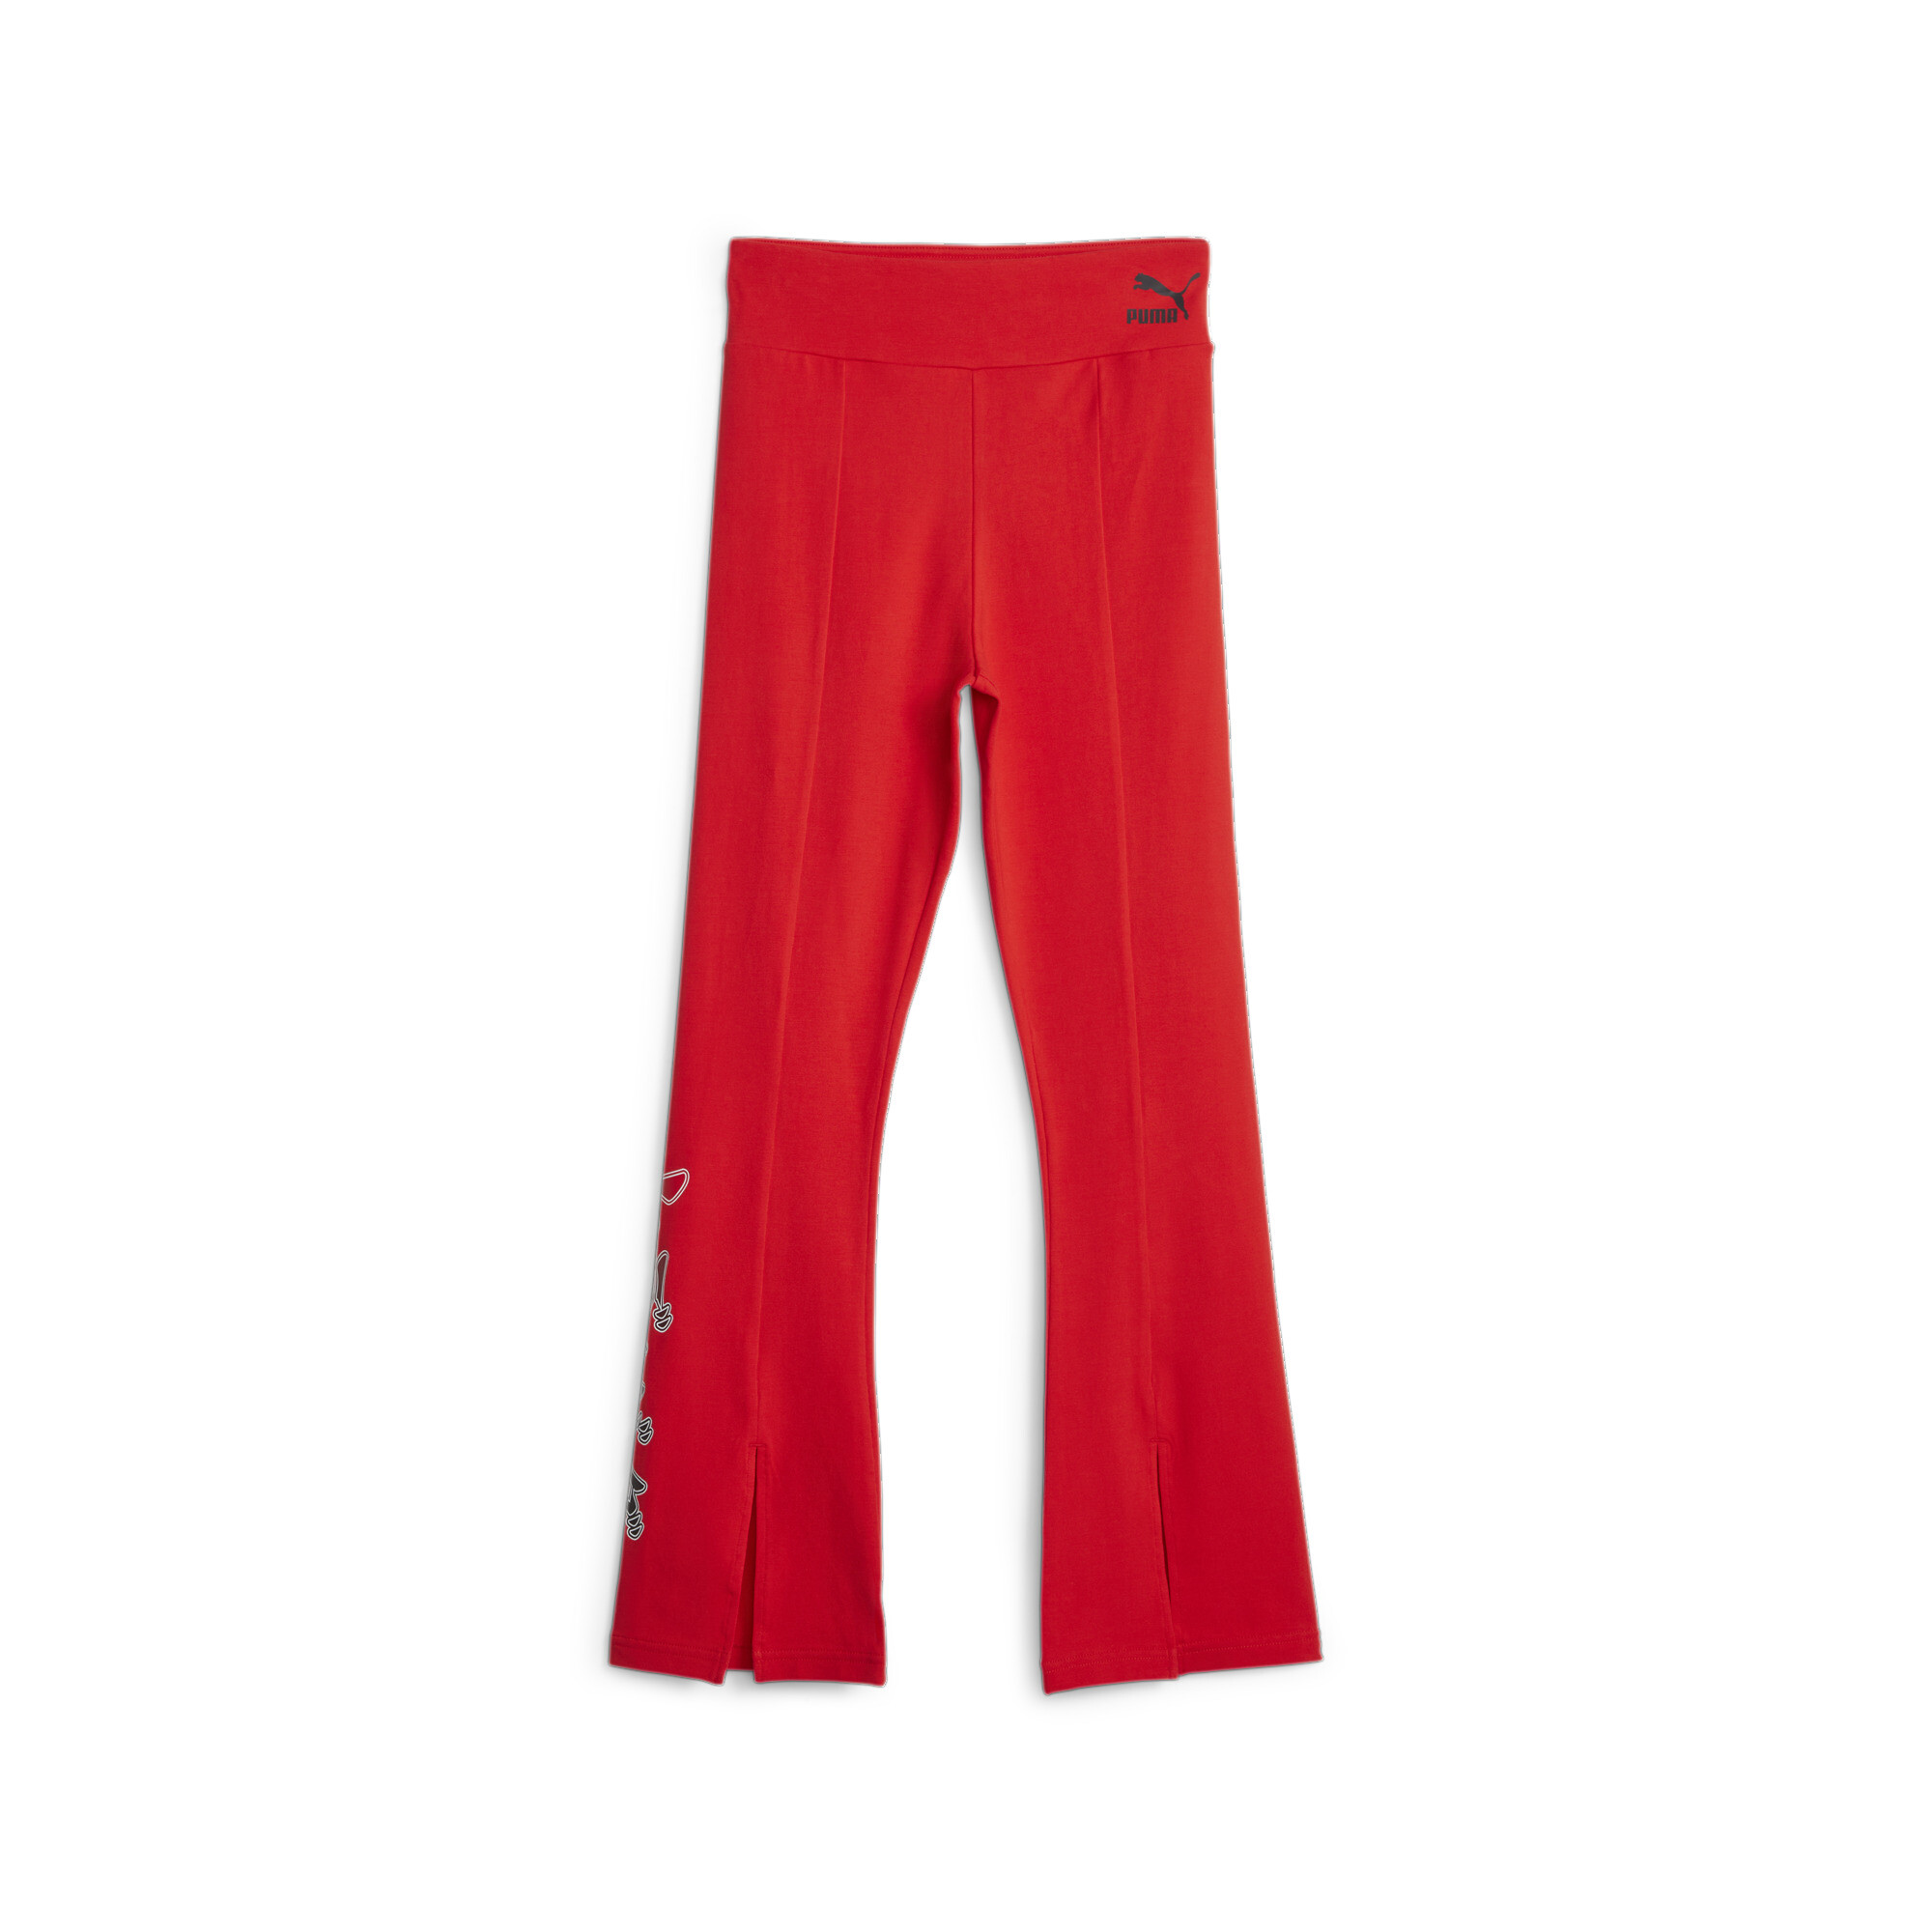 PUMA X MIRACULOUS Leggings In Red, Size 13-14 Youth